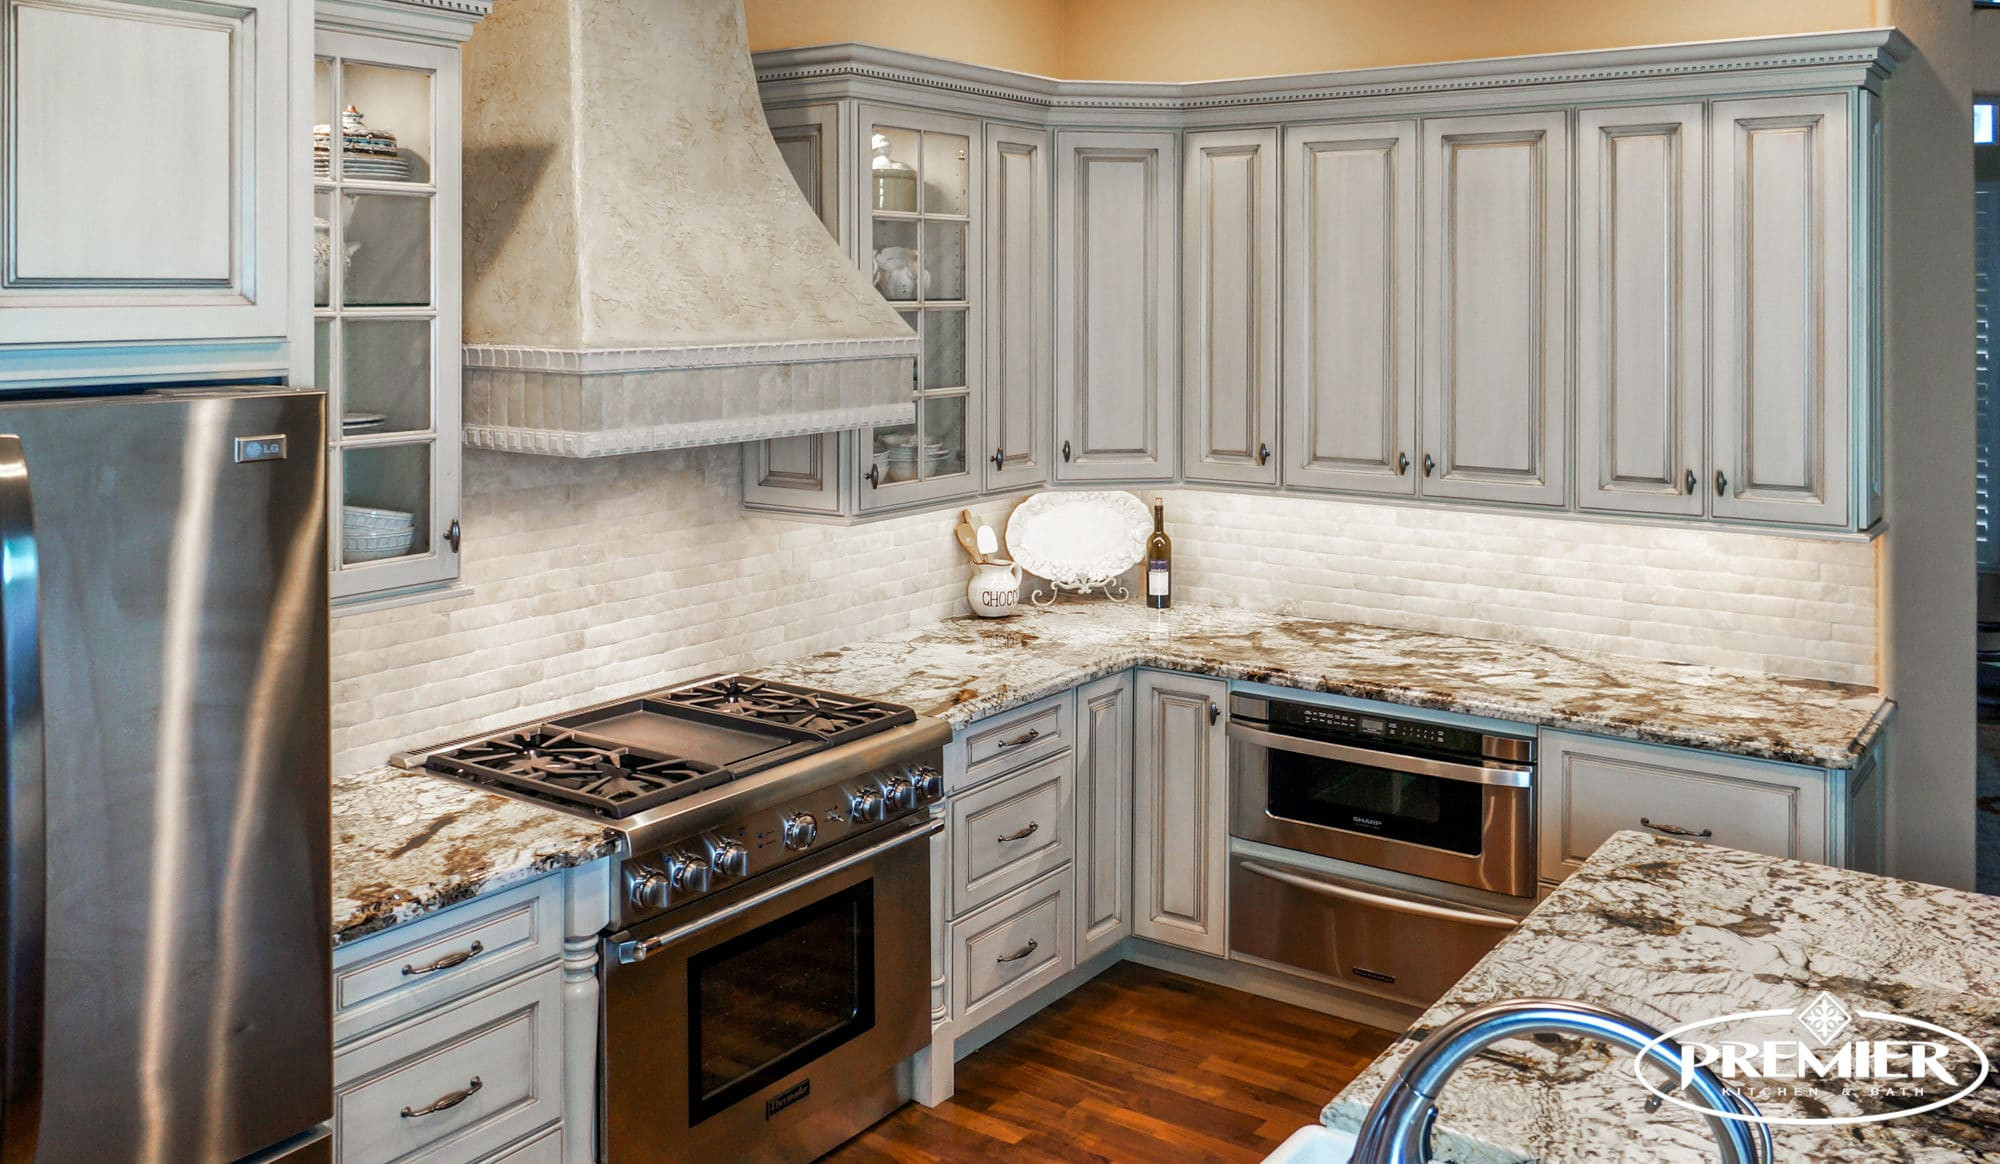 Kitchen And Bath Remodeling Contractors
 Local Remodeling Contractors